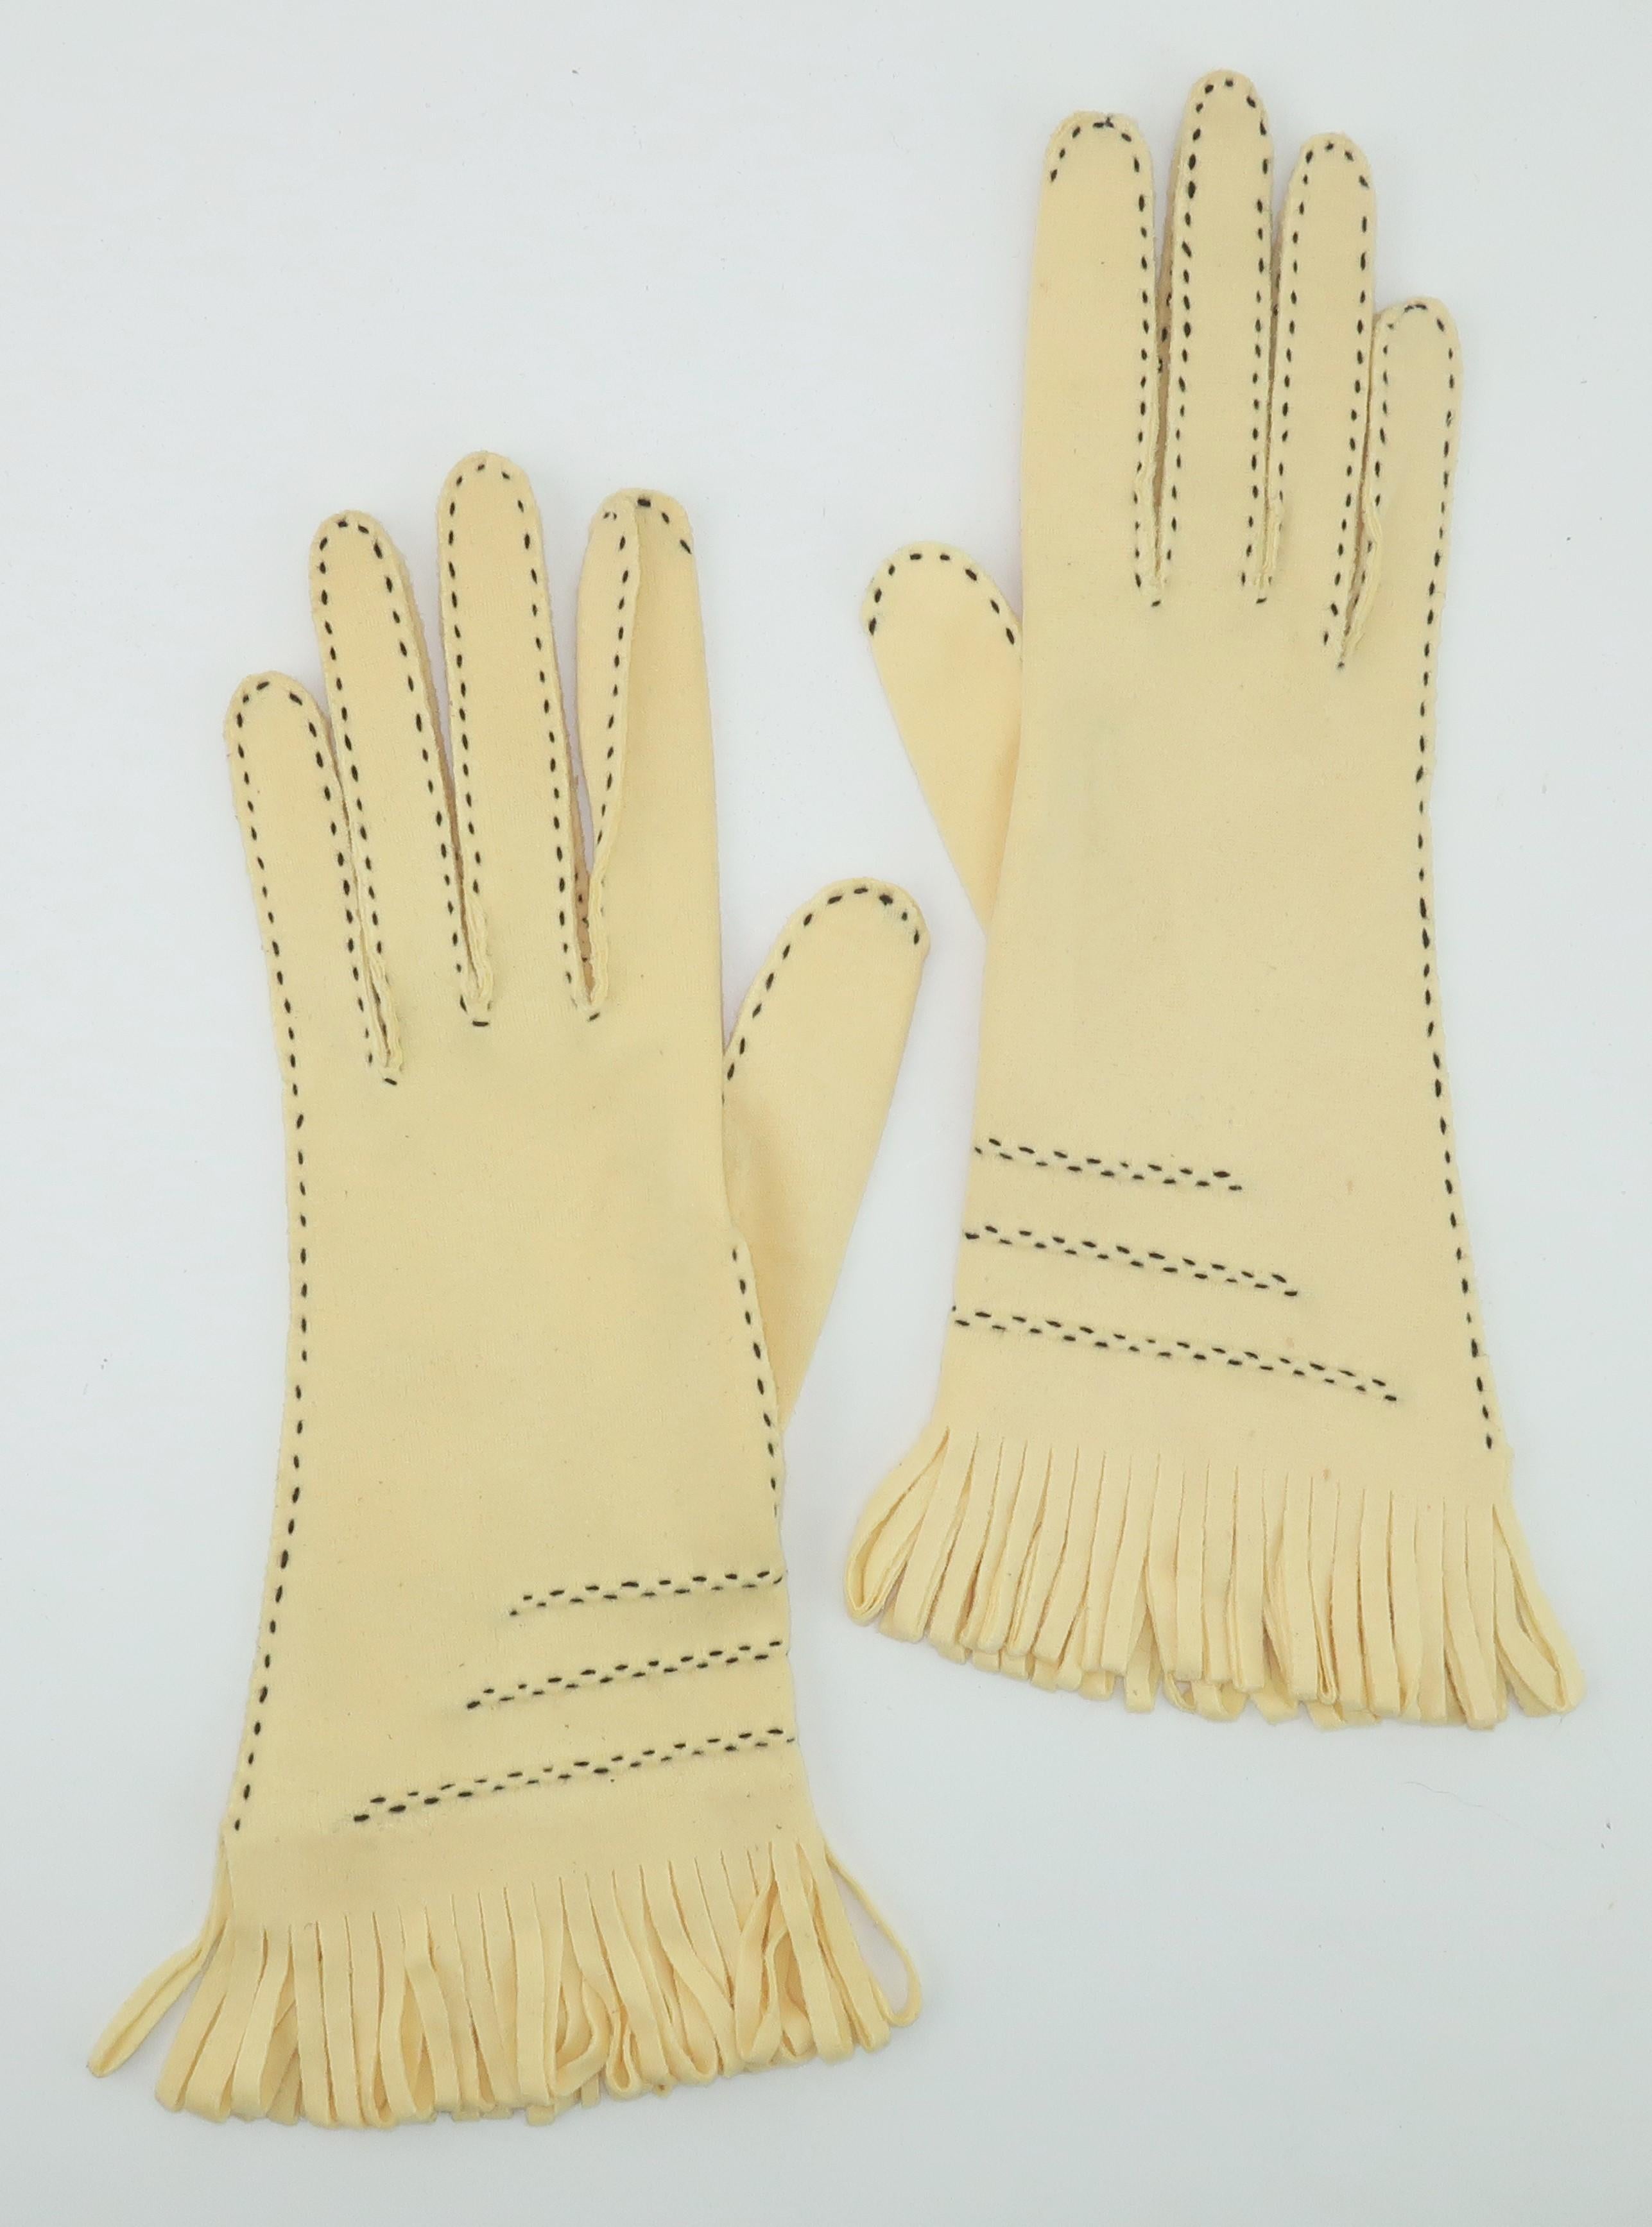 Women's Fabric Western Style Gauntlet Gloves With Fringe Details, 1960's